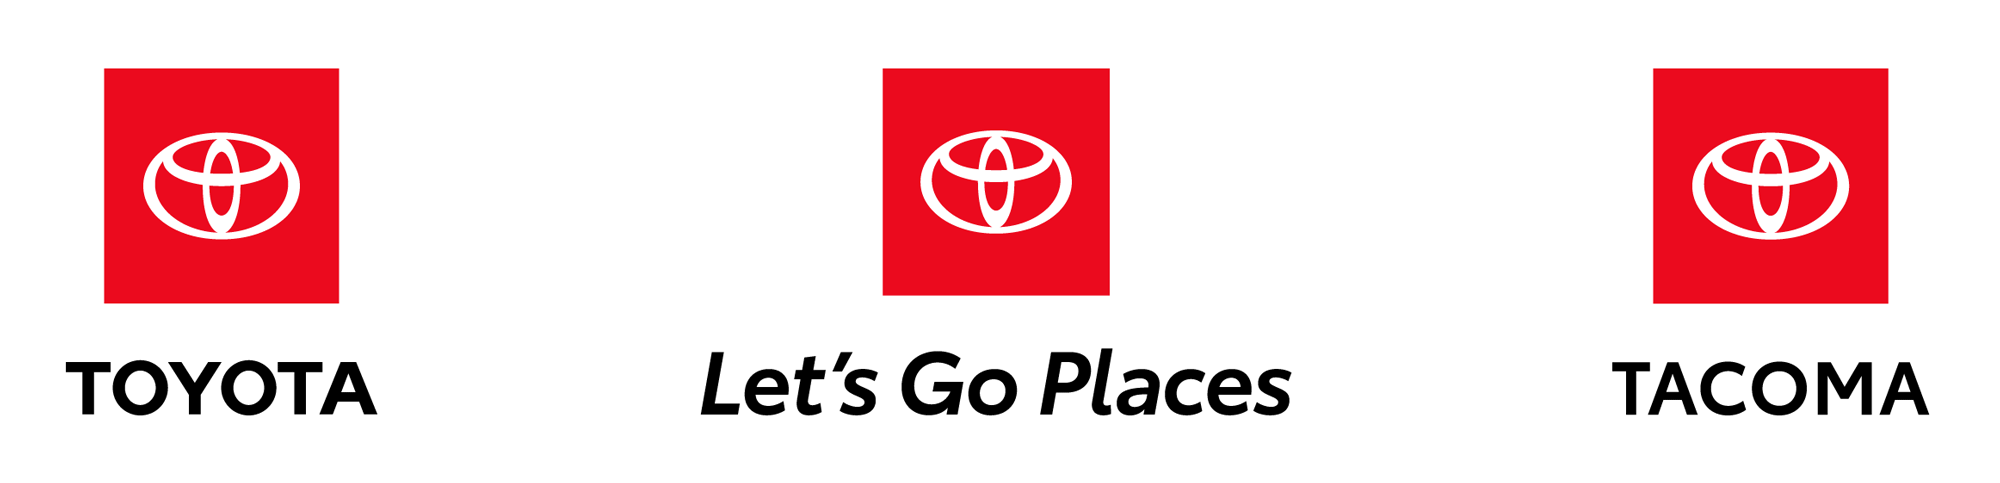 New Logo and Identity for Toyota